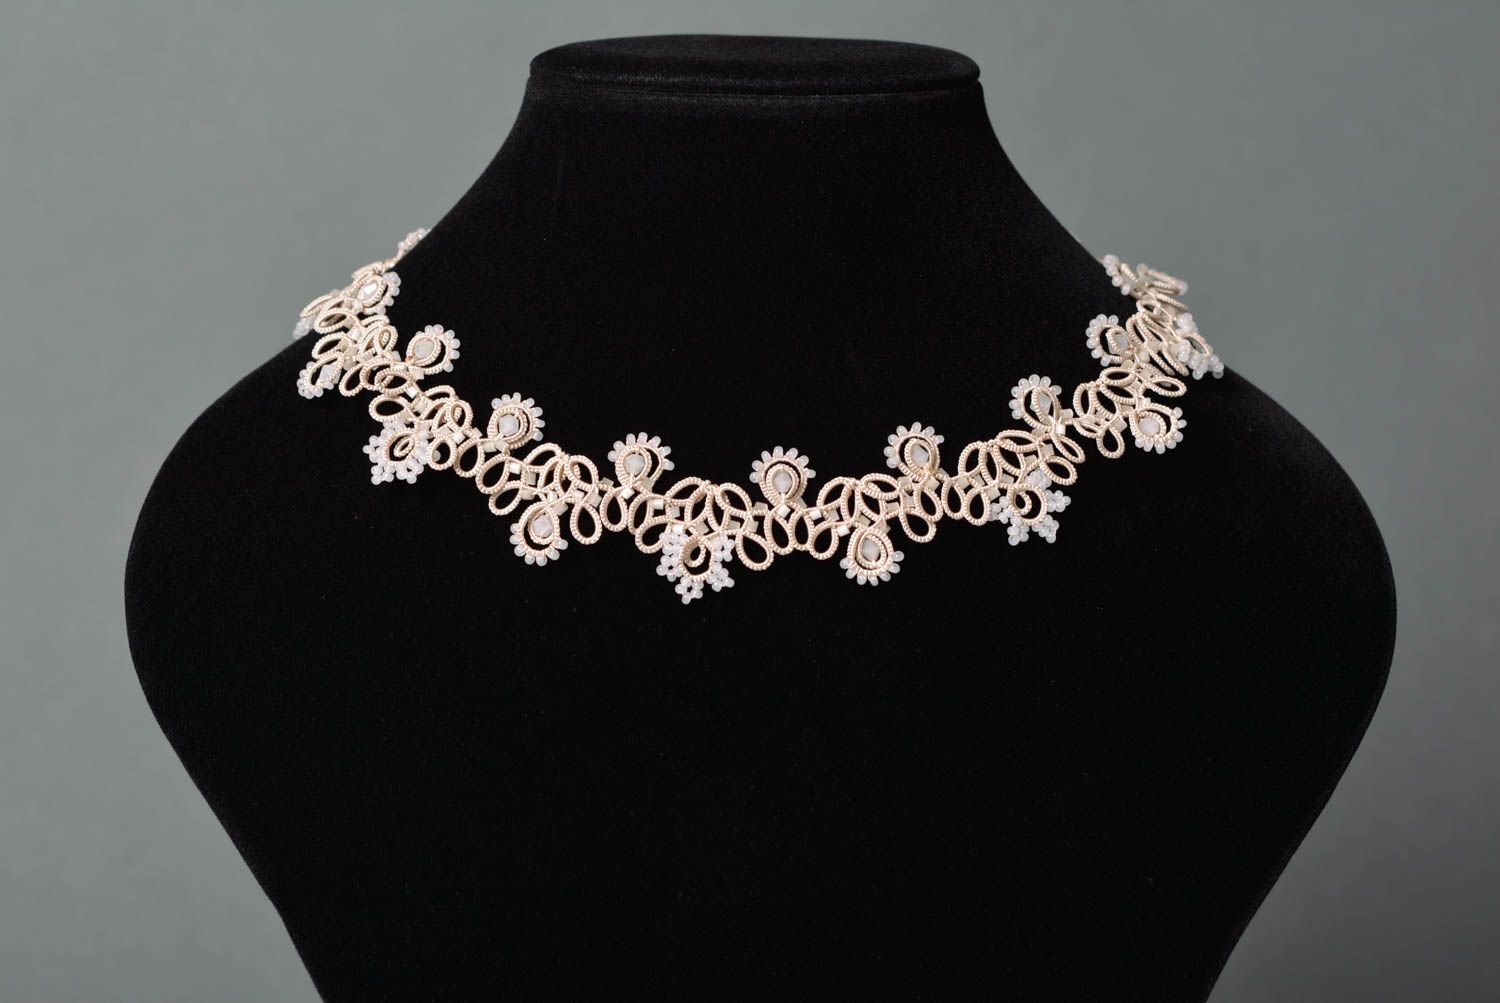 Handmade jewelry fashion necklaces for women tatting lace gifts for women photo 1